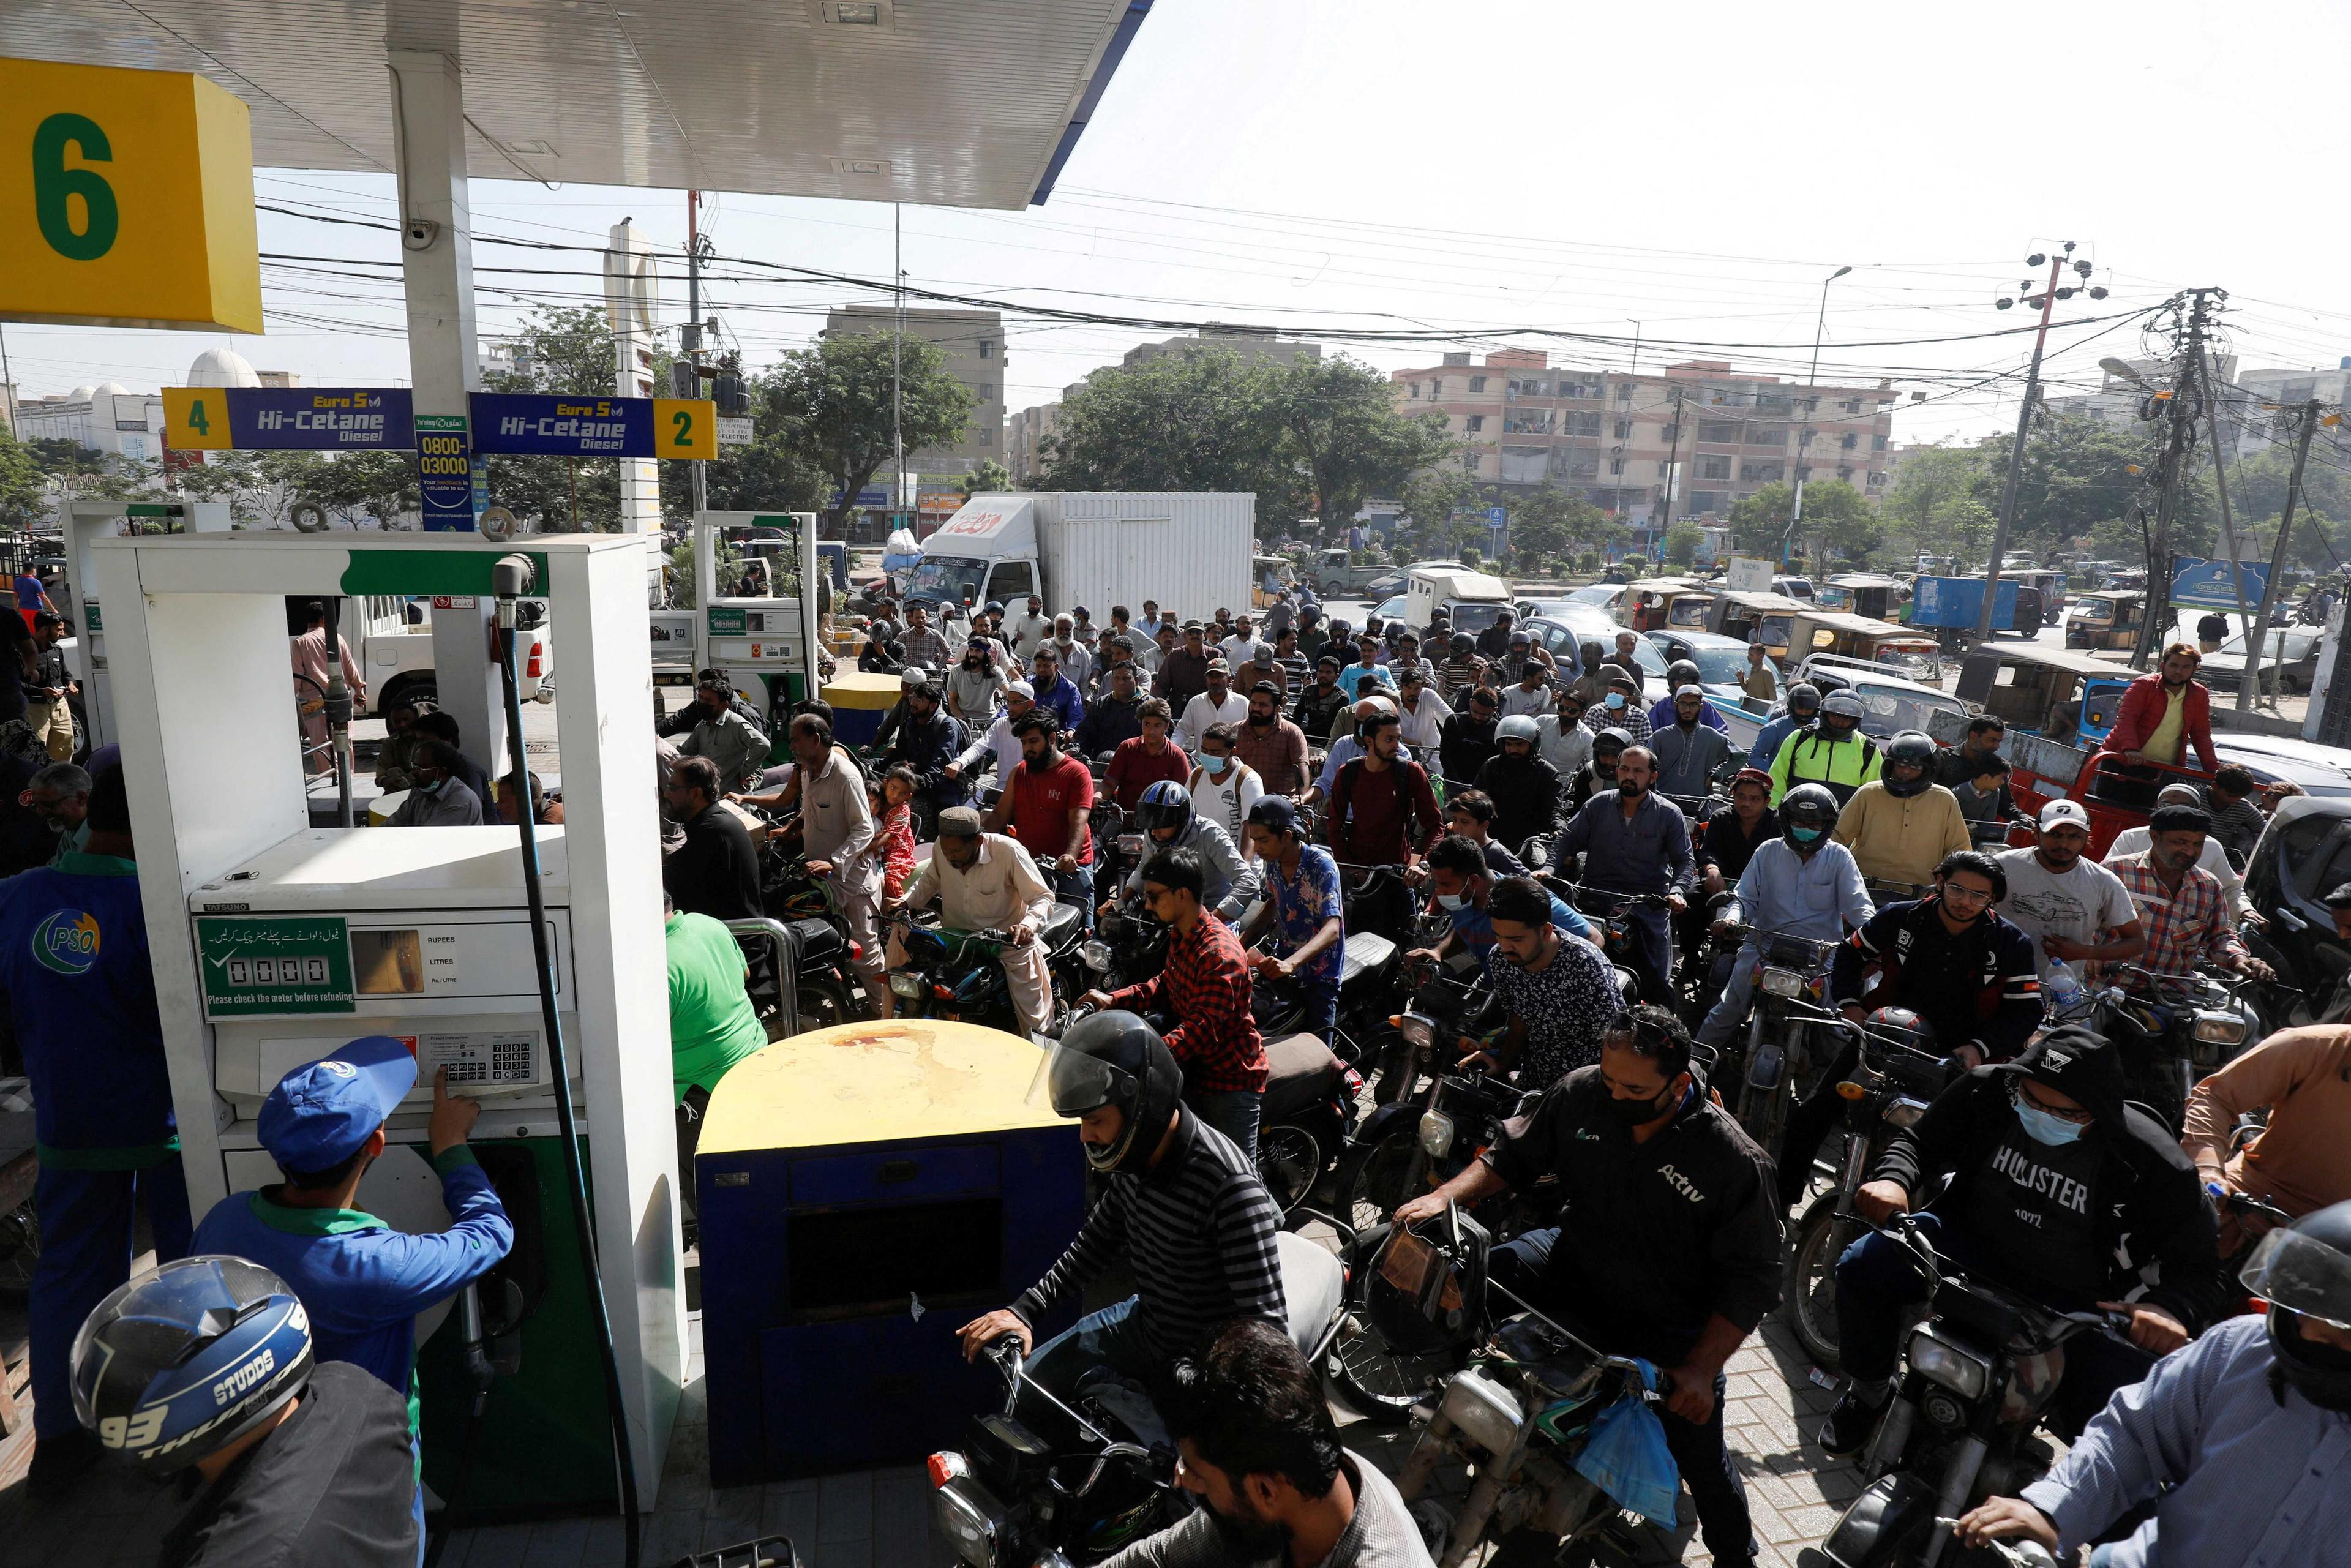 People on motorcycles wait for their turn to get petrol at a petrol station, after Pakistan Petroleum Dealers Association (PPDA) announced a countrywide strike, in Karachi, Pakistan, Nov 25, 2021. Photo: Reuters